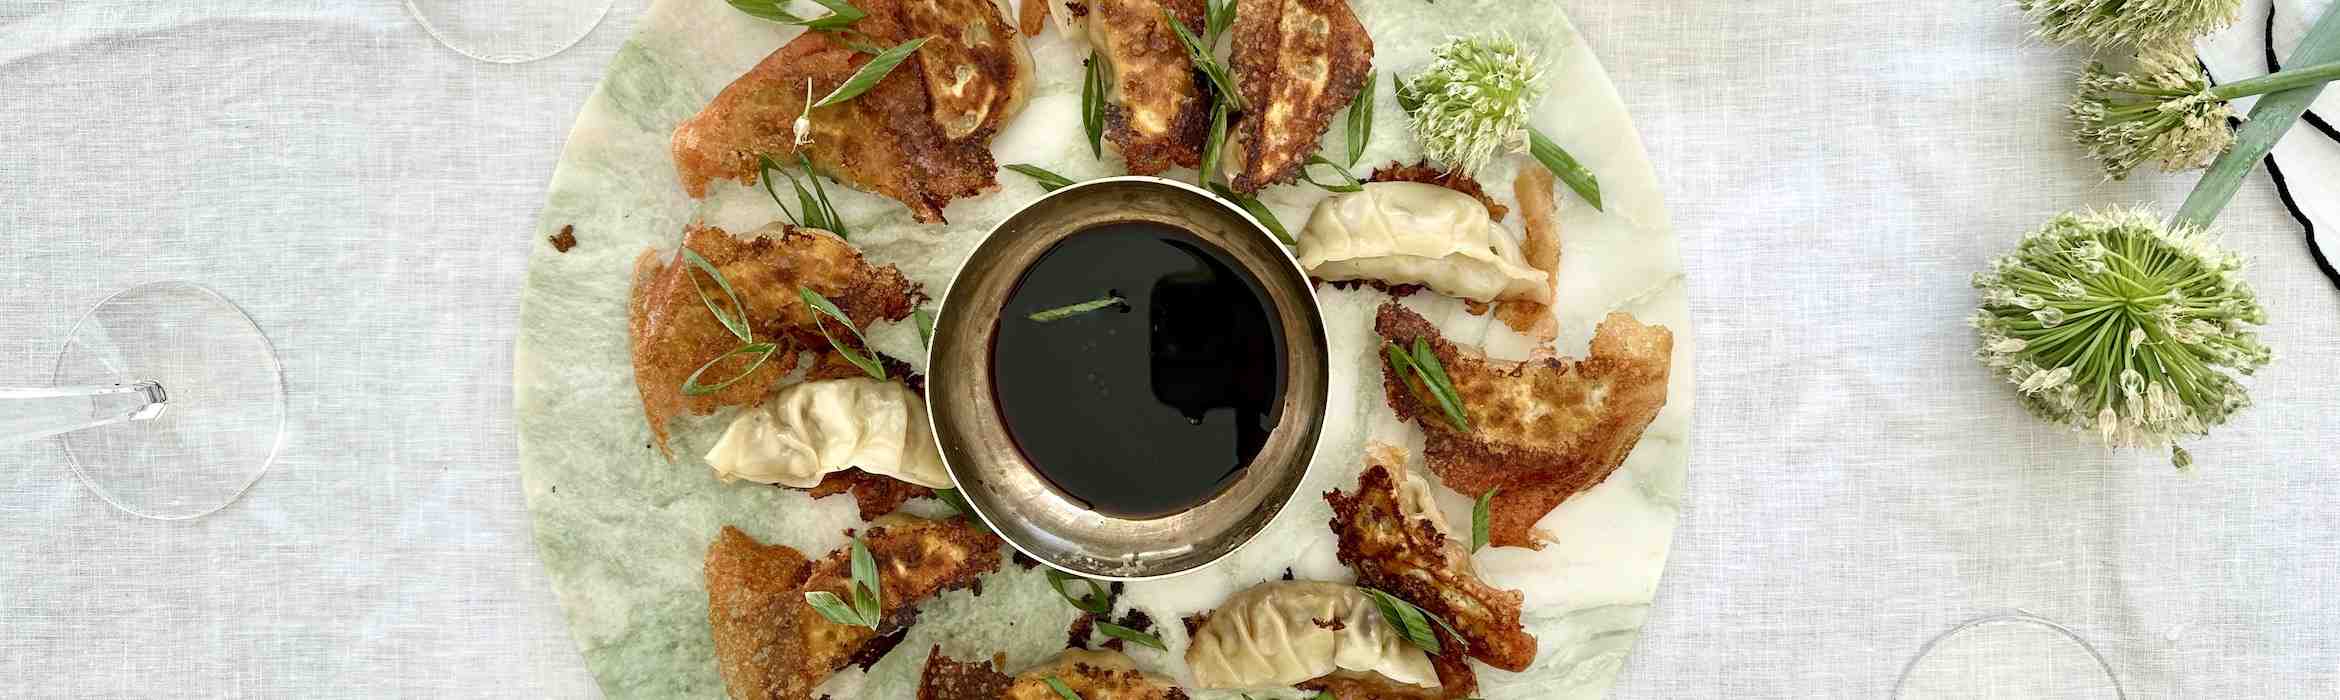 Pot Stickers with Roast Duck Breasts Recipe